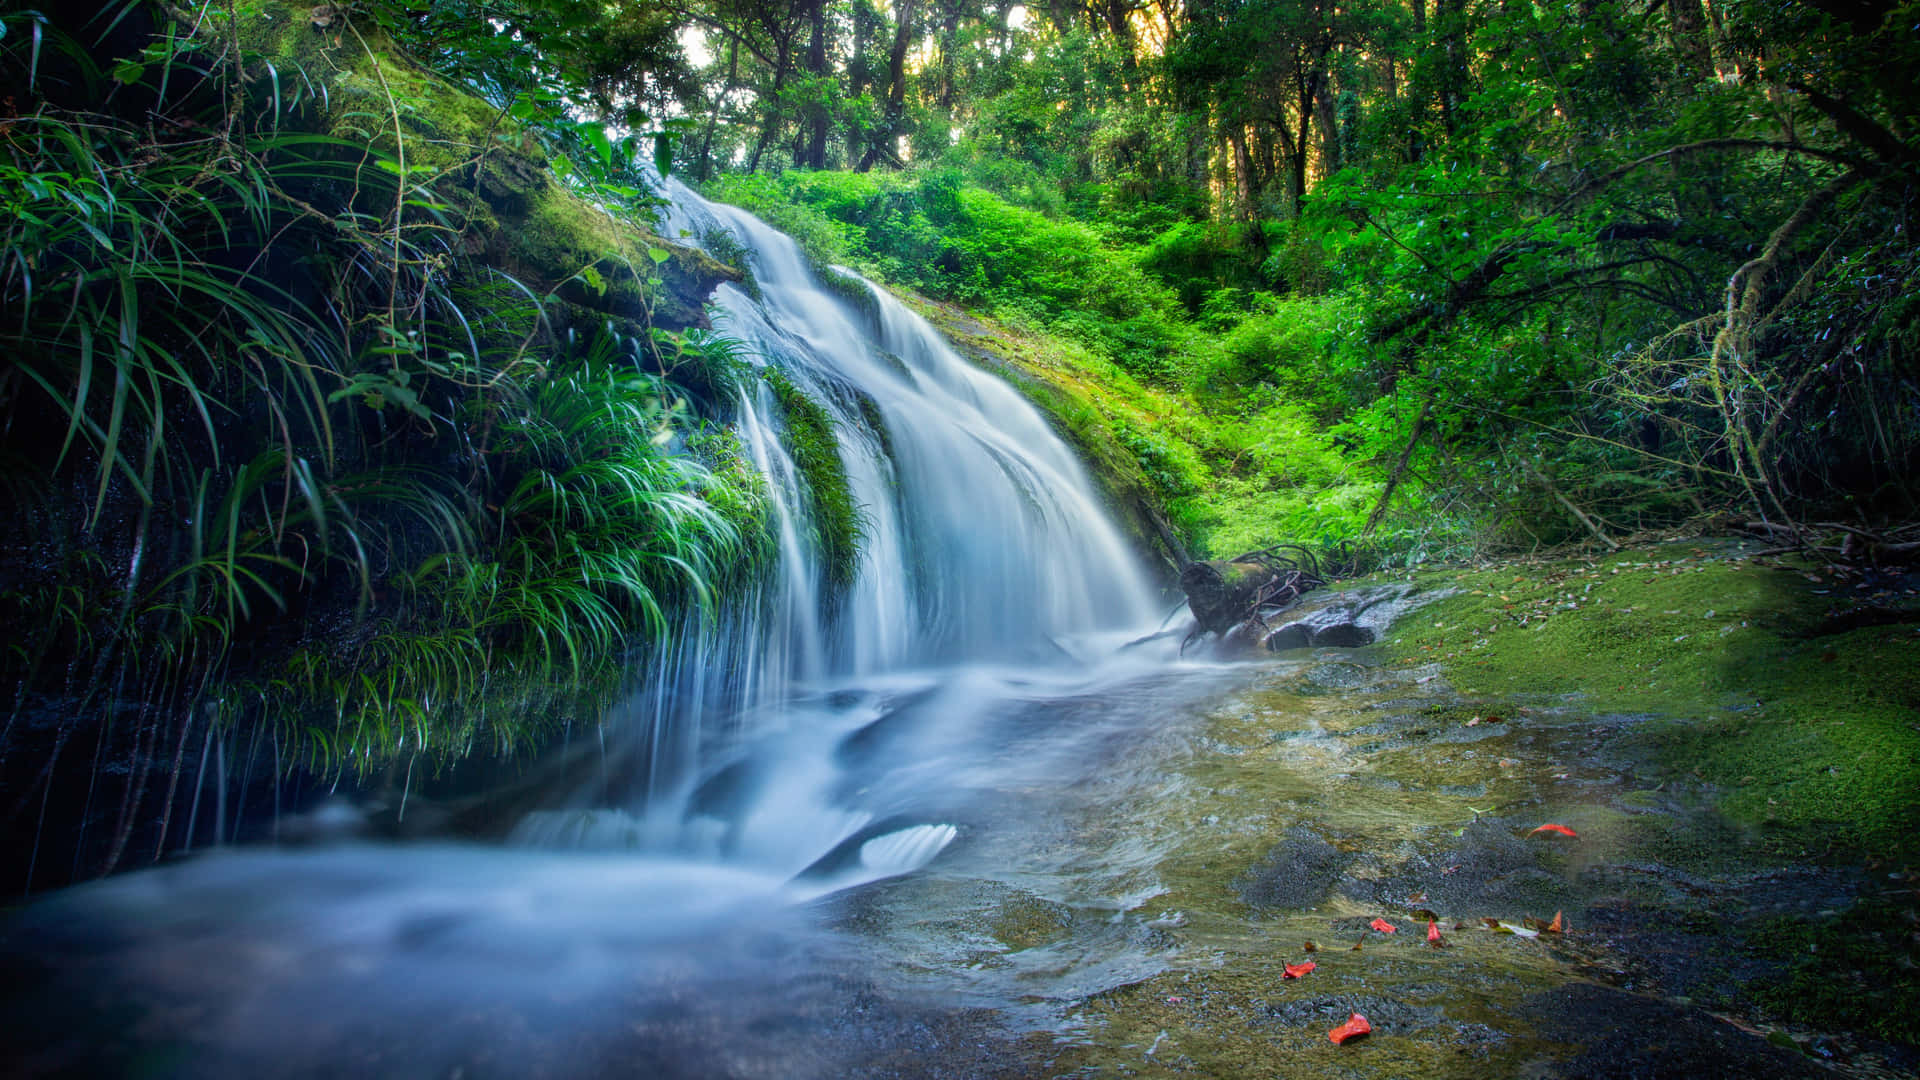 Take a journey to a tranquil oasis with this stunning Waterfall background.